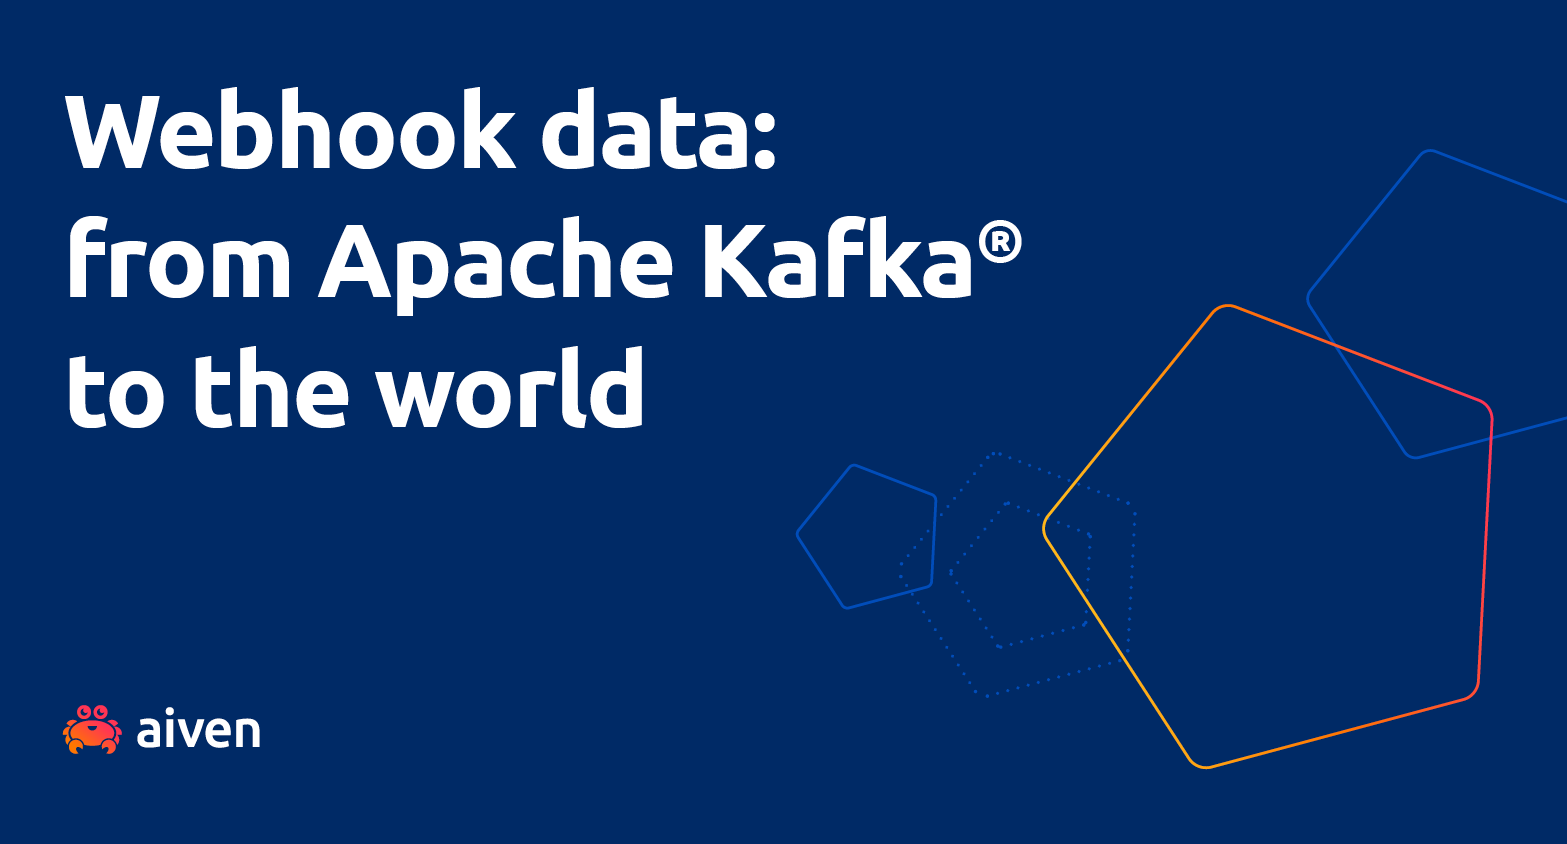 Hero image for the blog post reading 'Webhook data: from Apache Kafka® to the world'